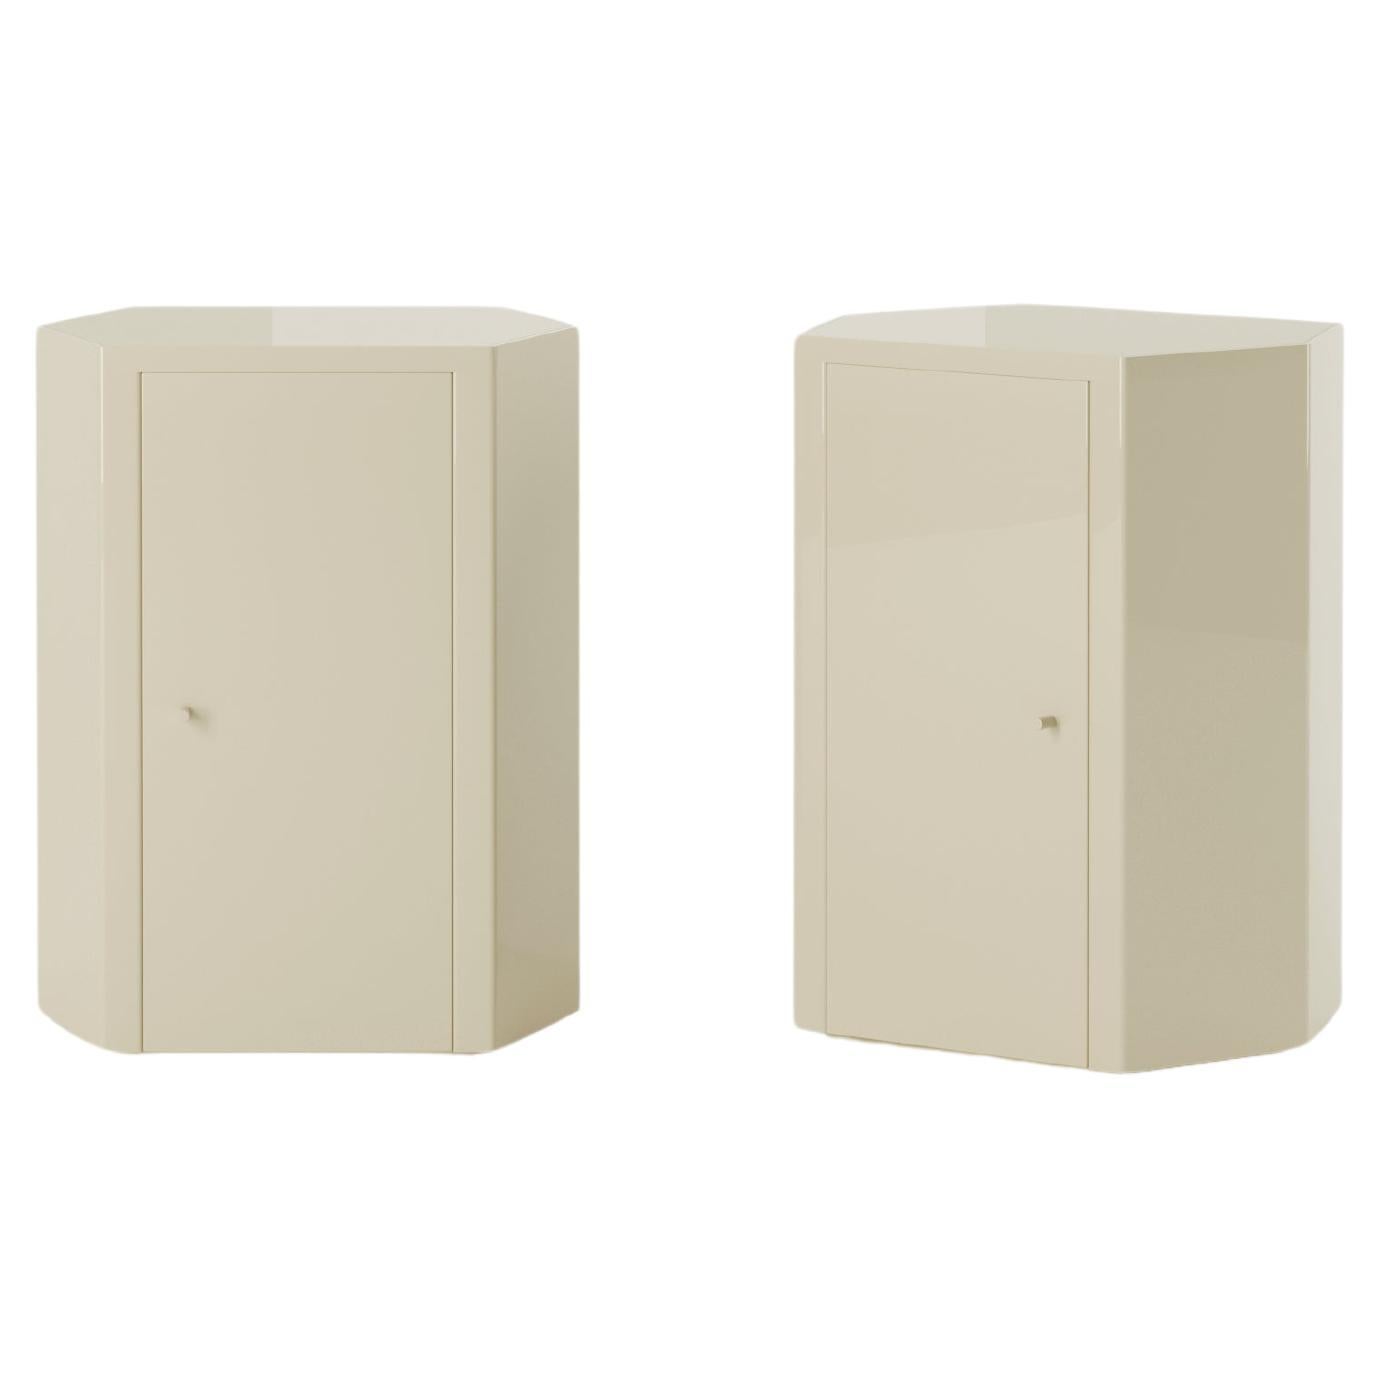 Pair of Park Night Stands in Butter Cream Lacquer by Yaniv Chen for Lemon For Sale